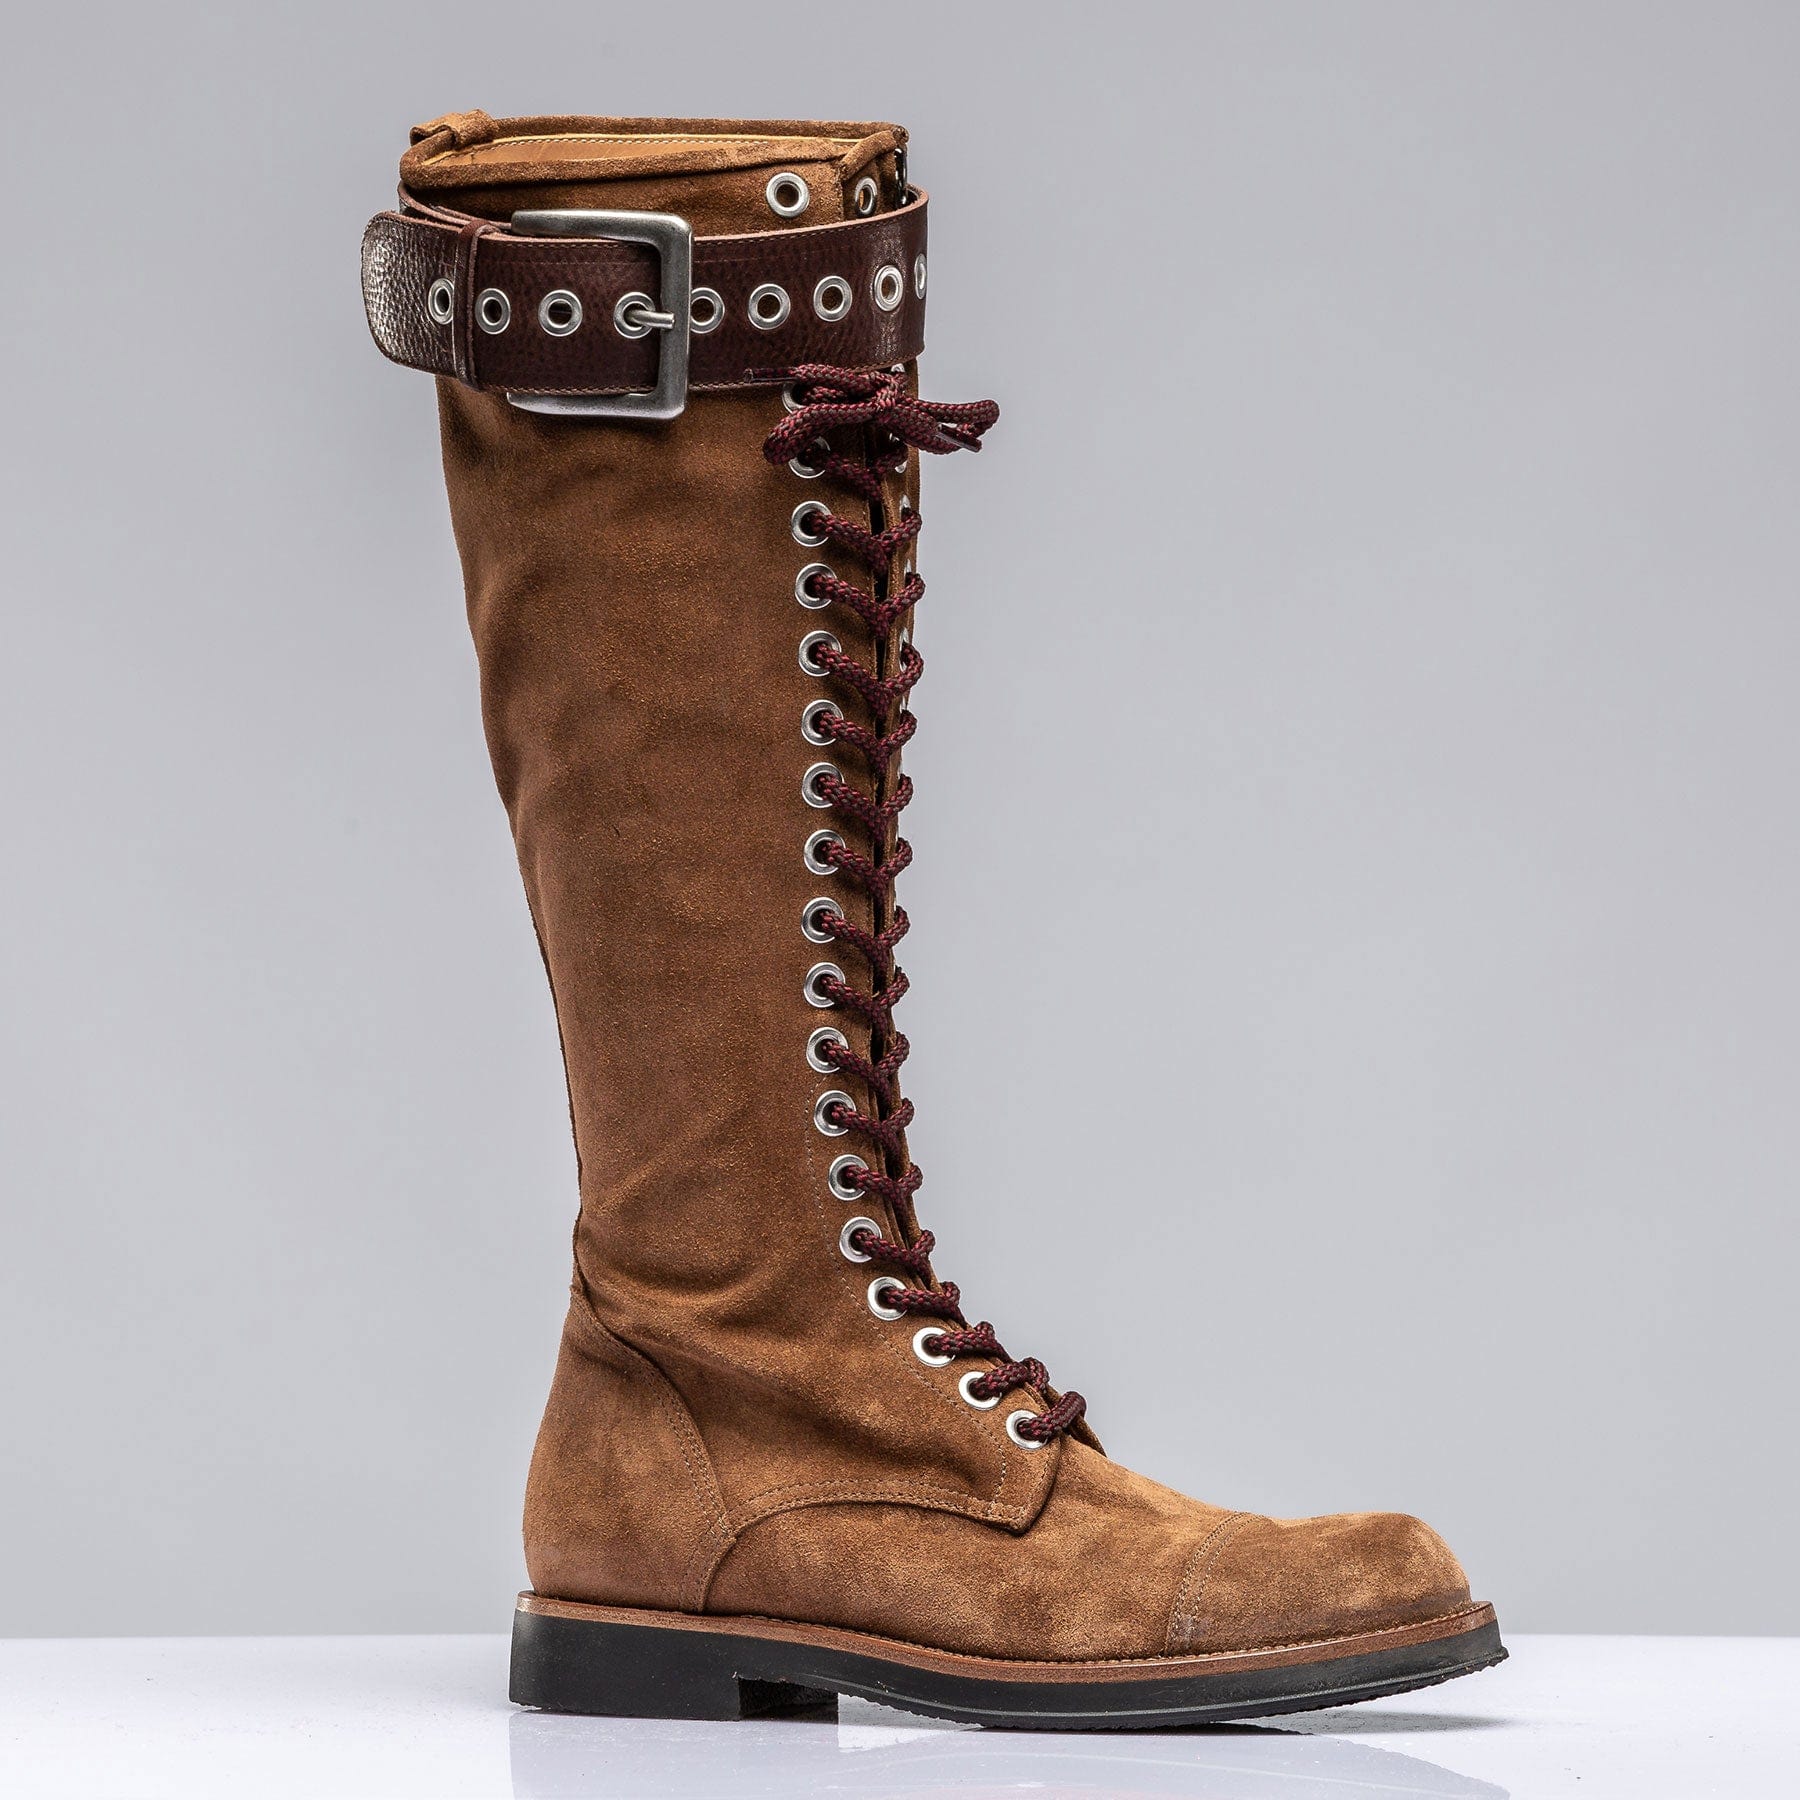 Alps Tall Lace Up Boot W/ Buckle In Cognac Suede - AXEL'S